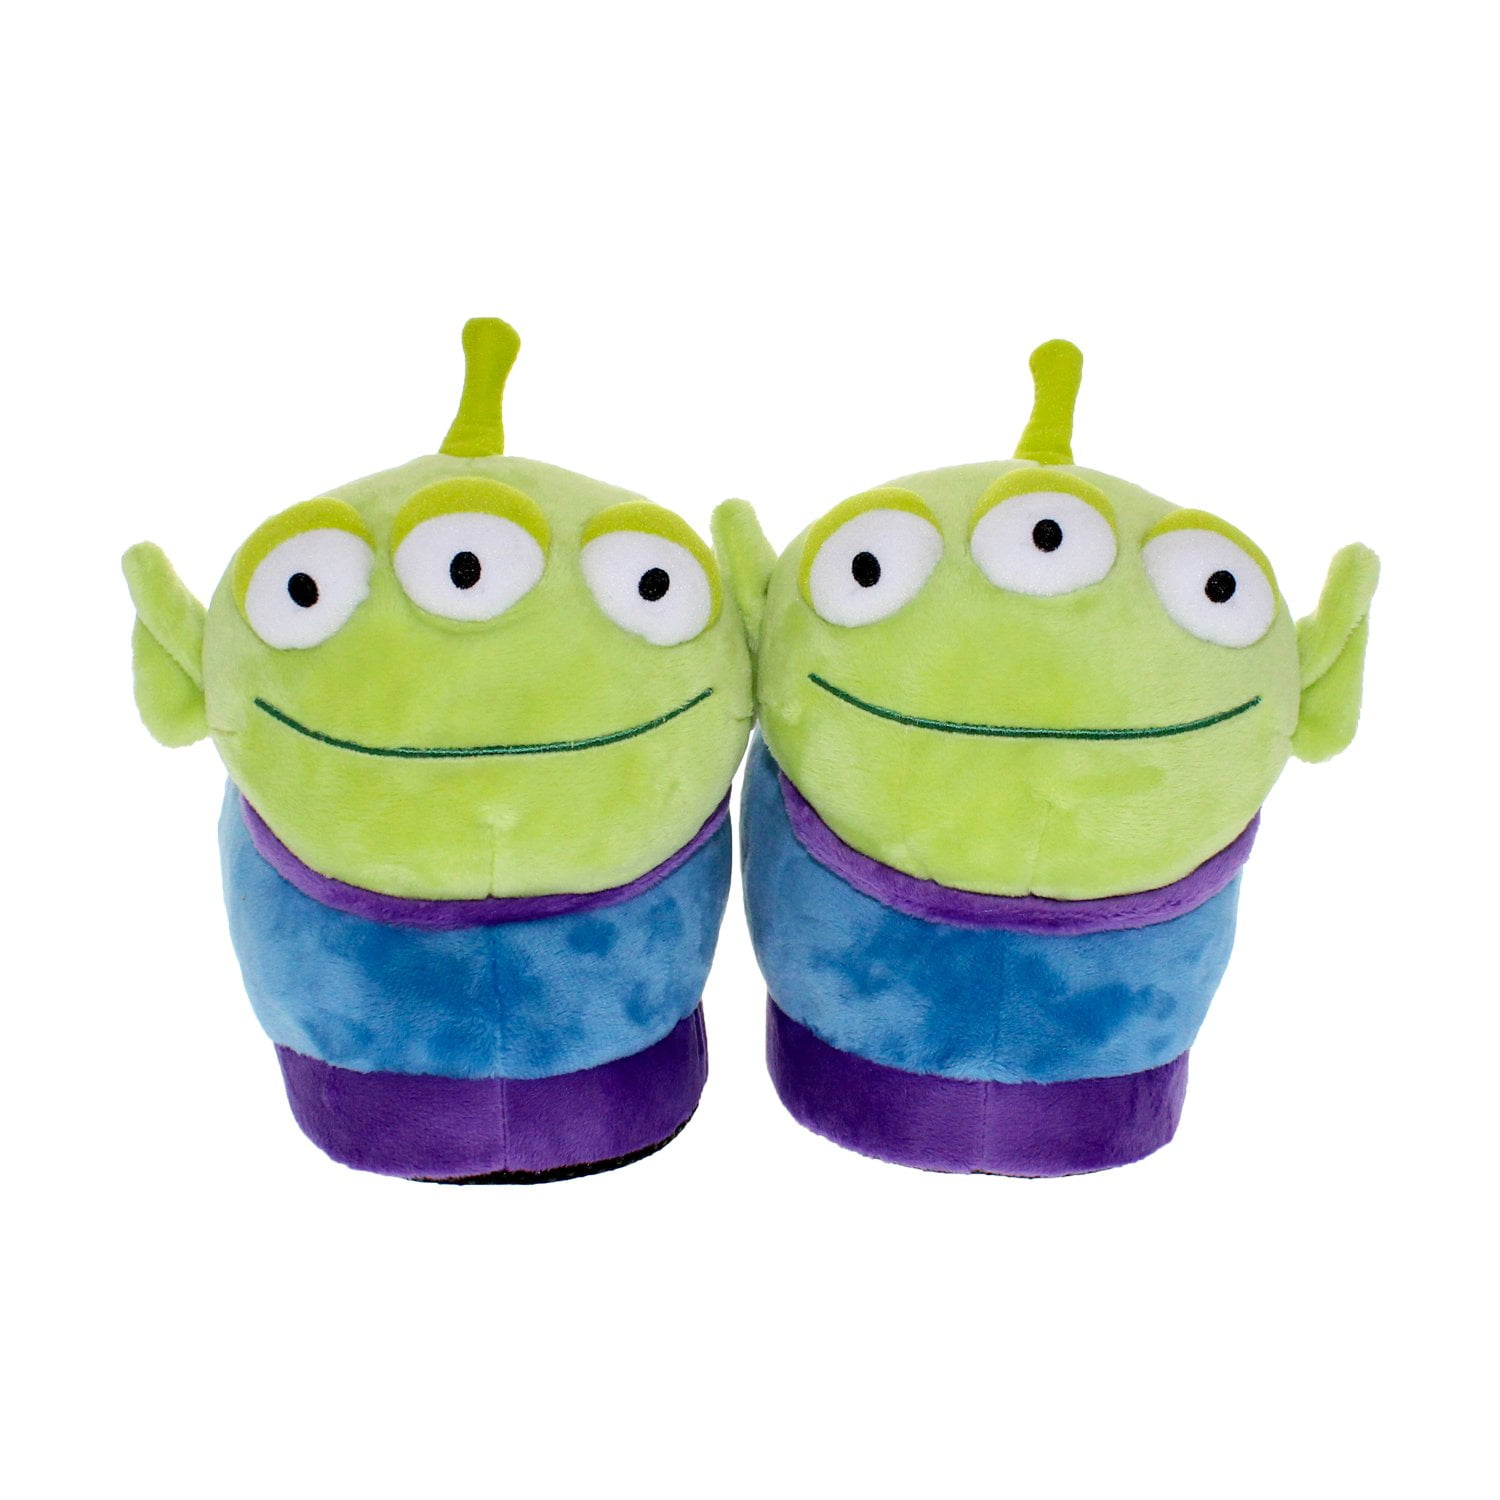 adult toy story slippers